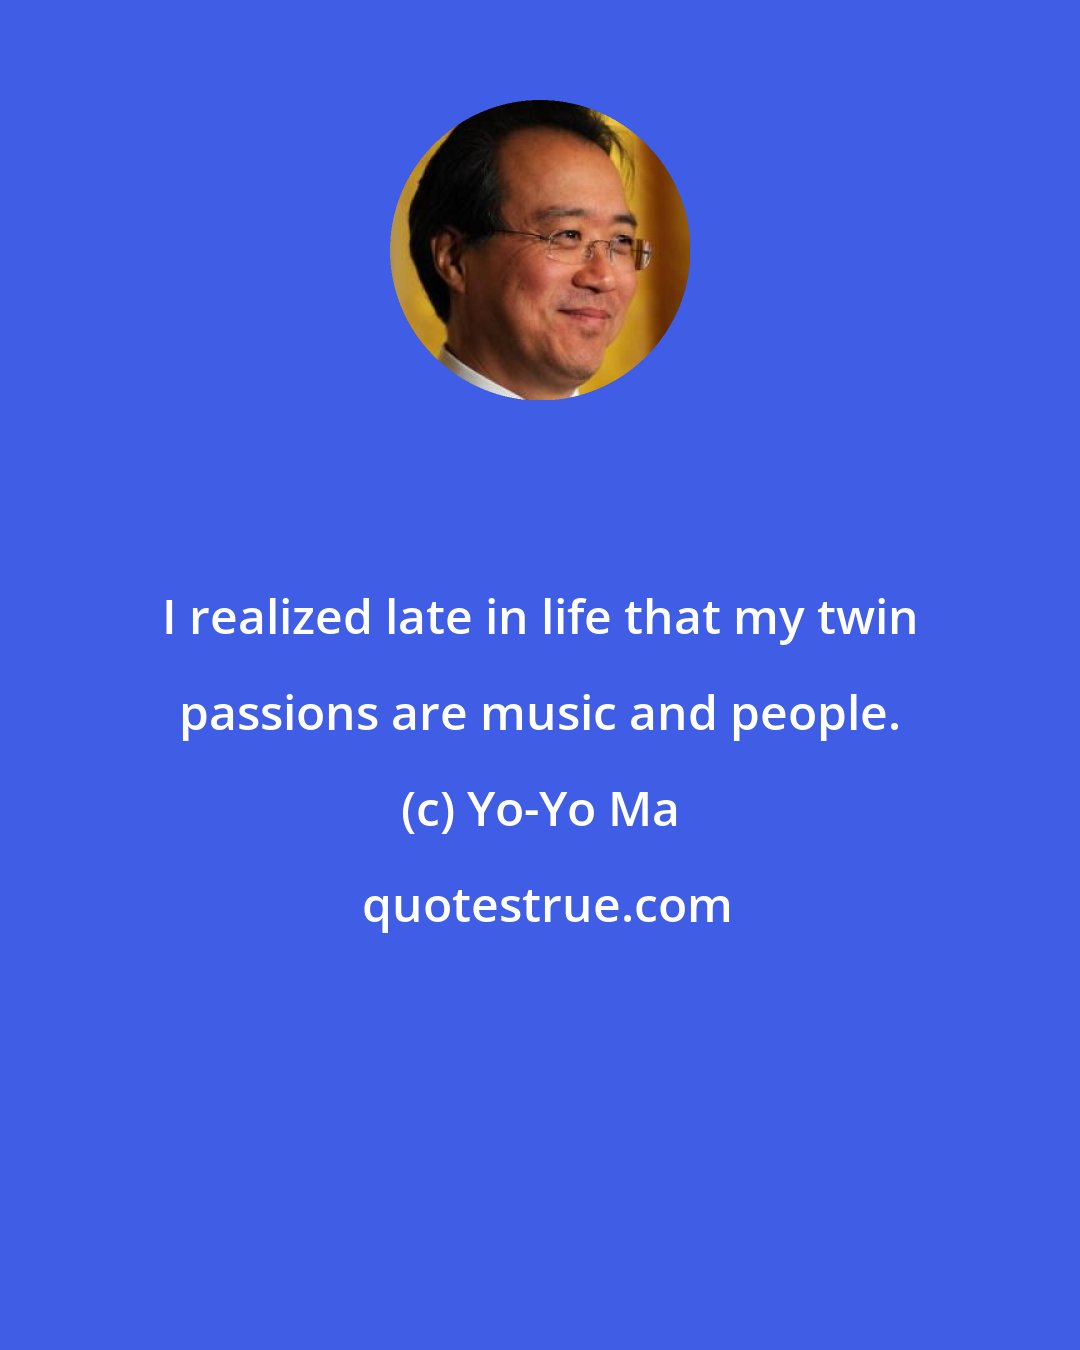 Yo-Yo Ma: I realized late in life that my twin passions are music and people.